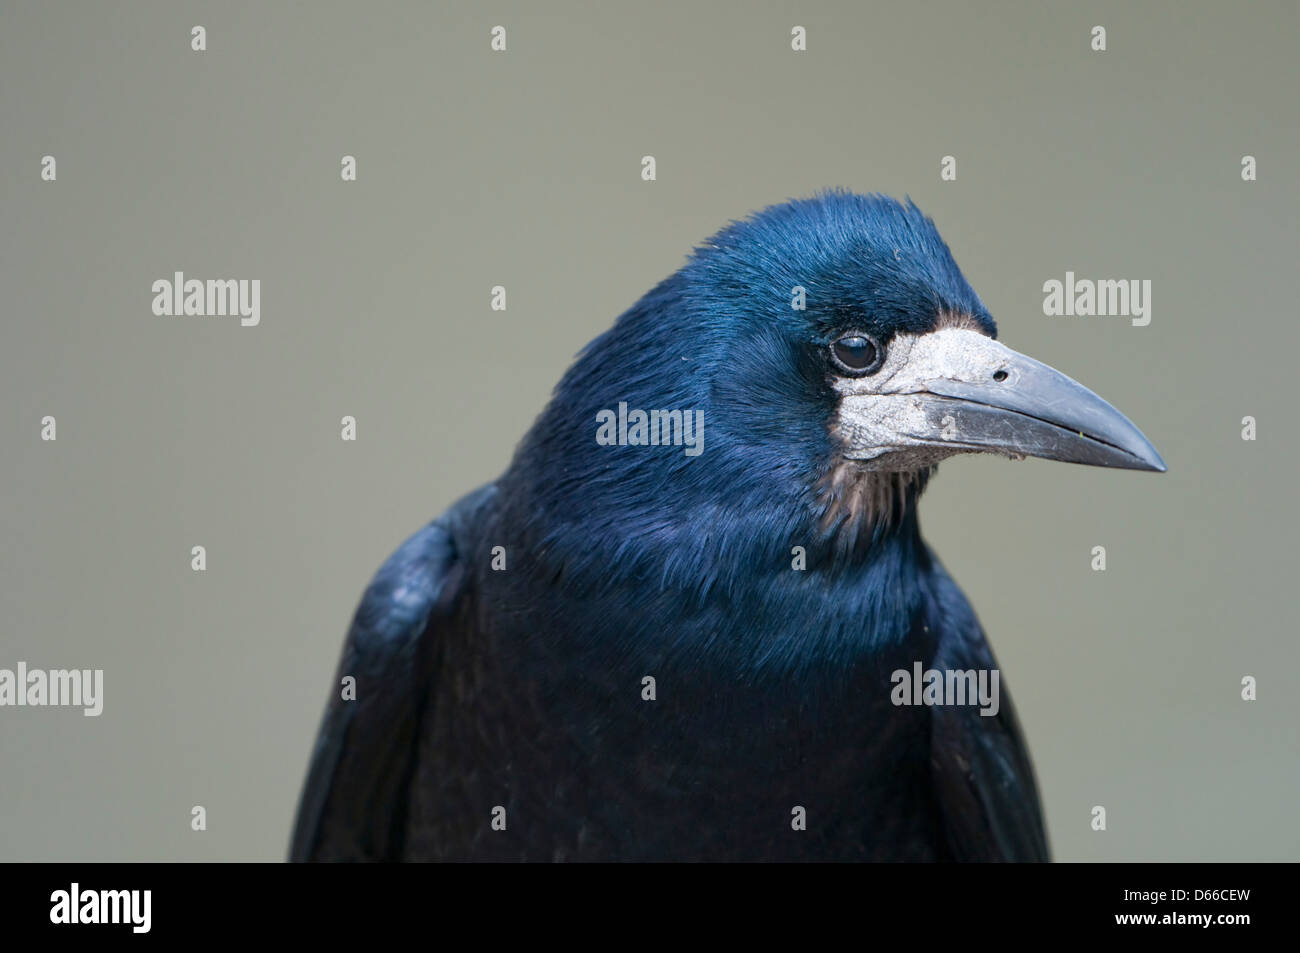 Close up portrait shot of a Rook showing great beak and feather detail Stock Photo